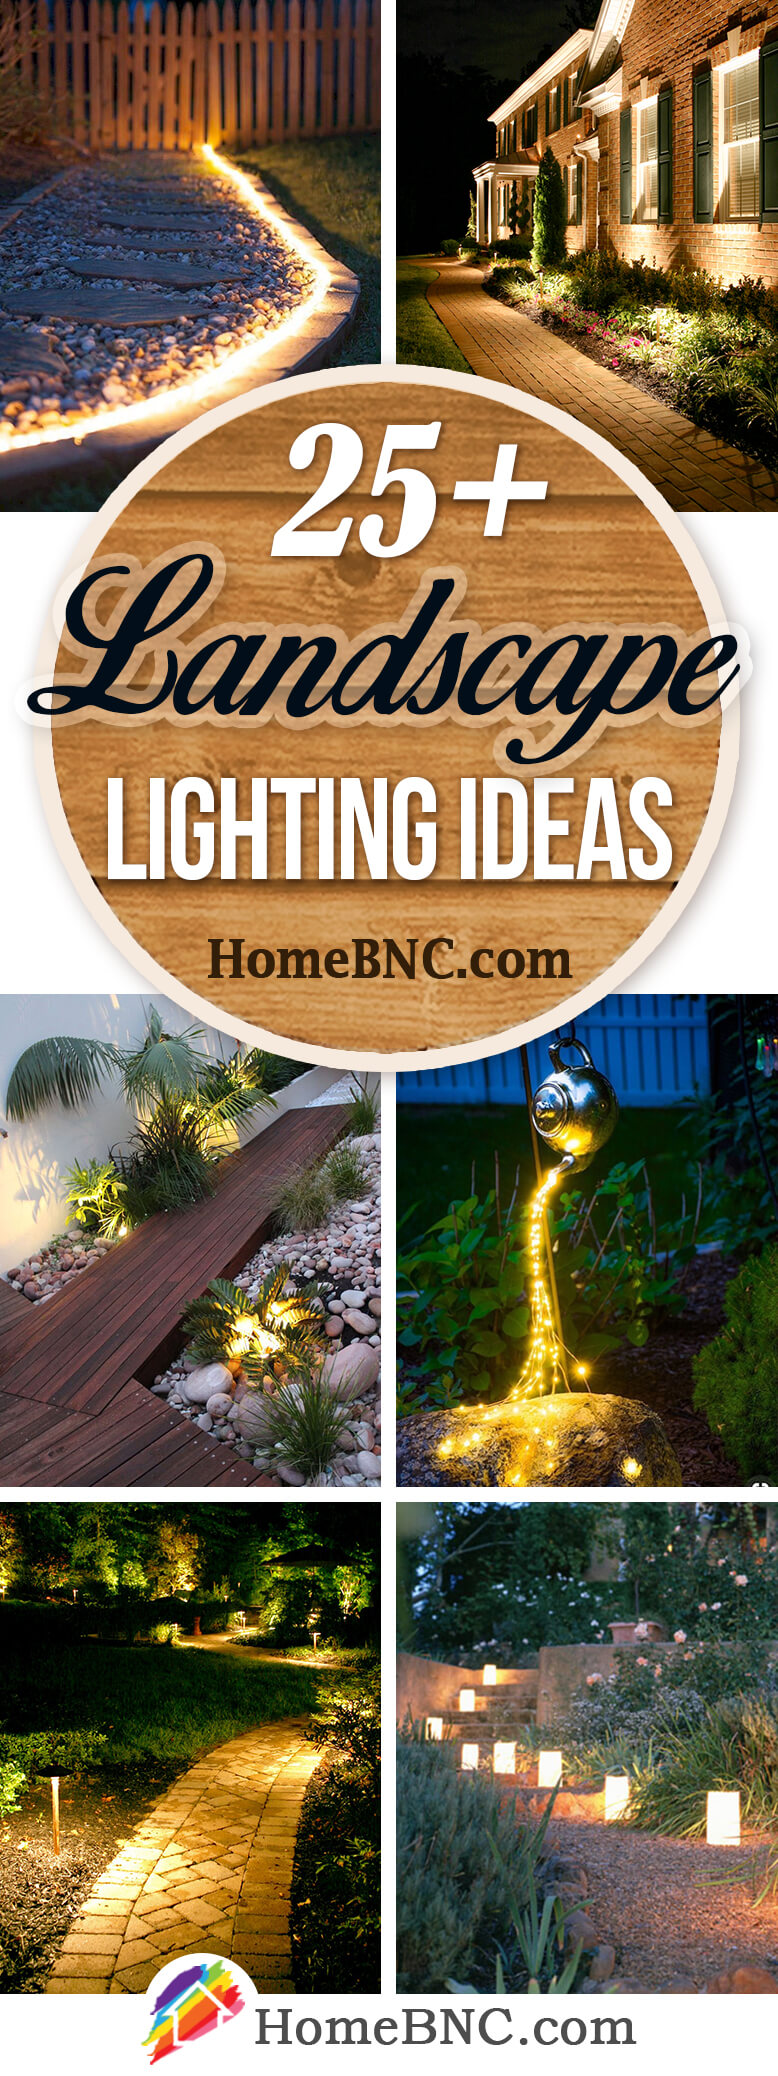 18+ Best Landscape Lighting Ideas and Designs for 18